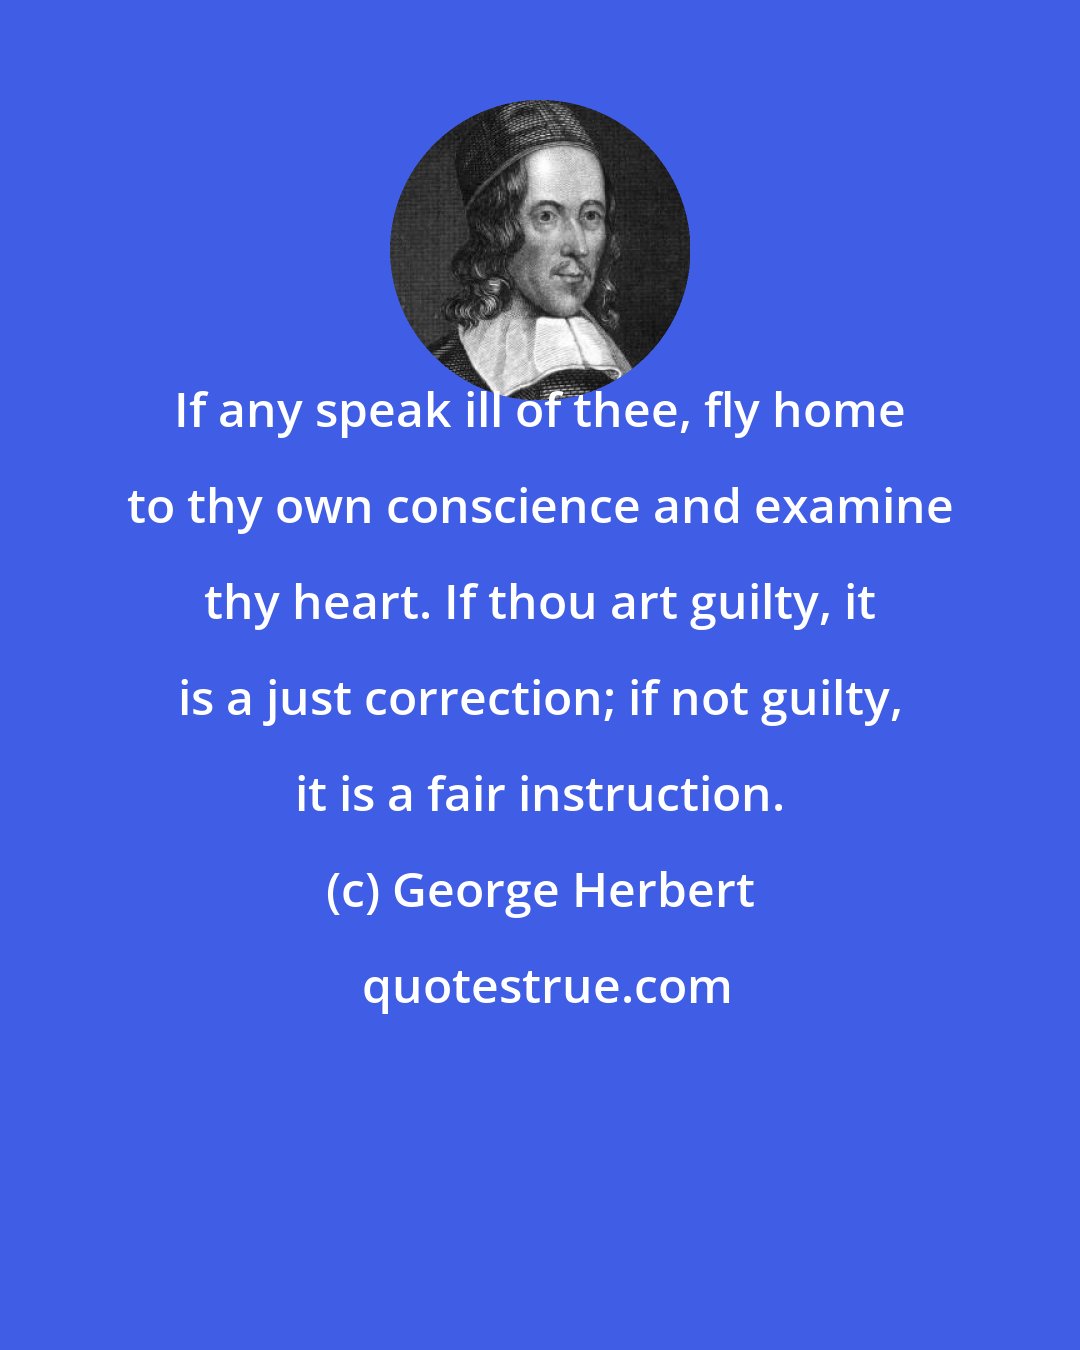 George Herbert: If any speak ill of thee, fly home to thy own conscience and examine thy heart. If thou art guilty, it is a just correction; if not guilty, it is a fair instruction.